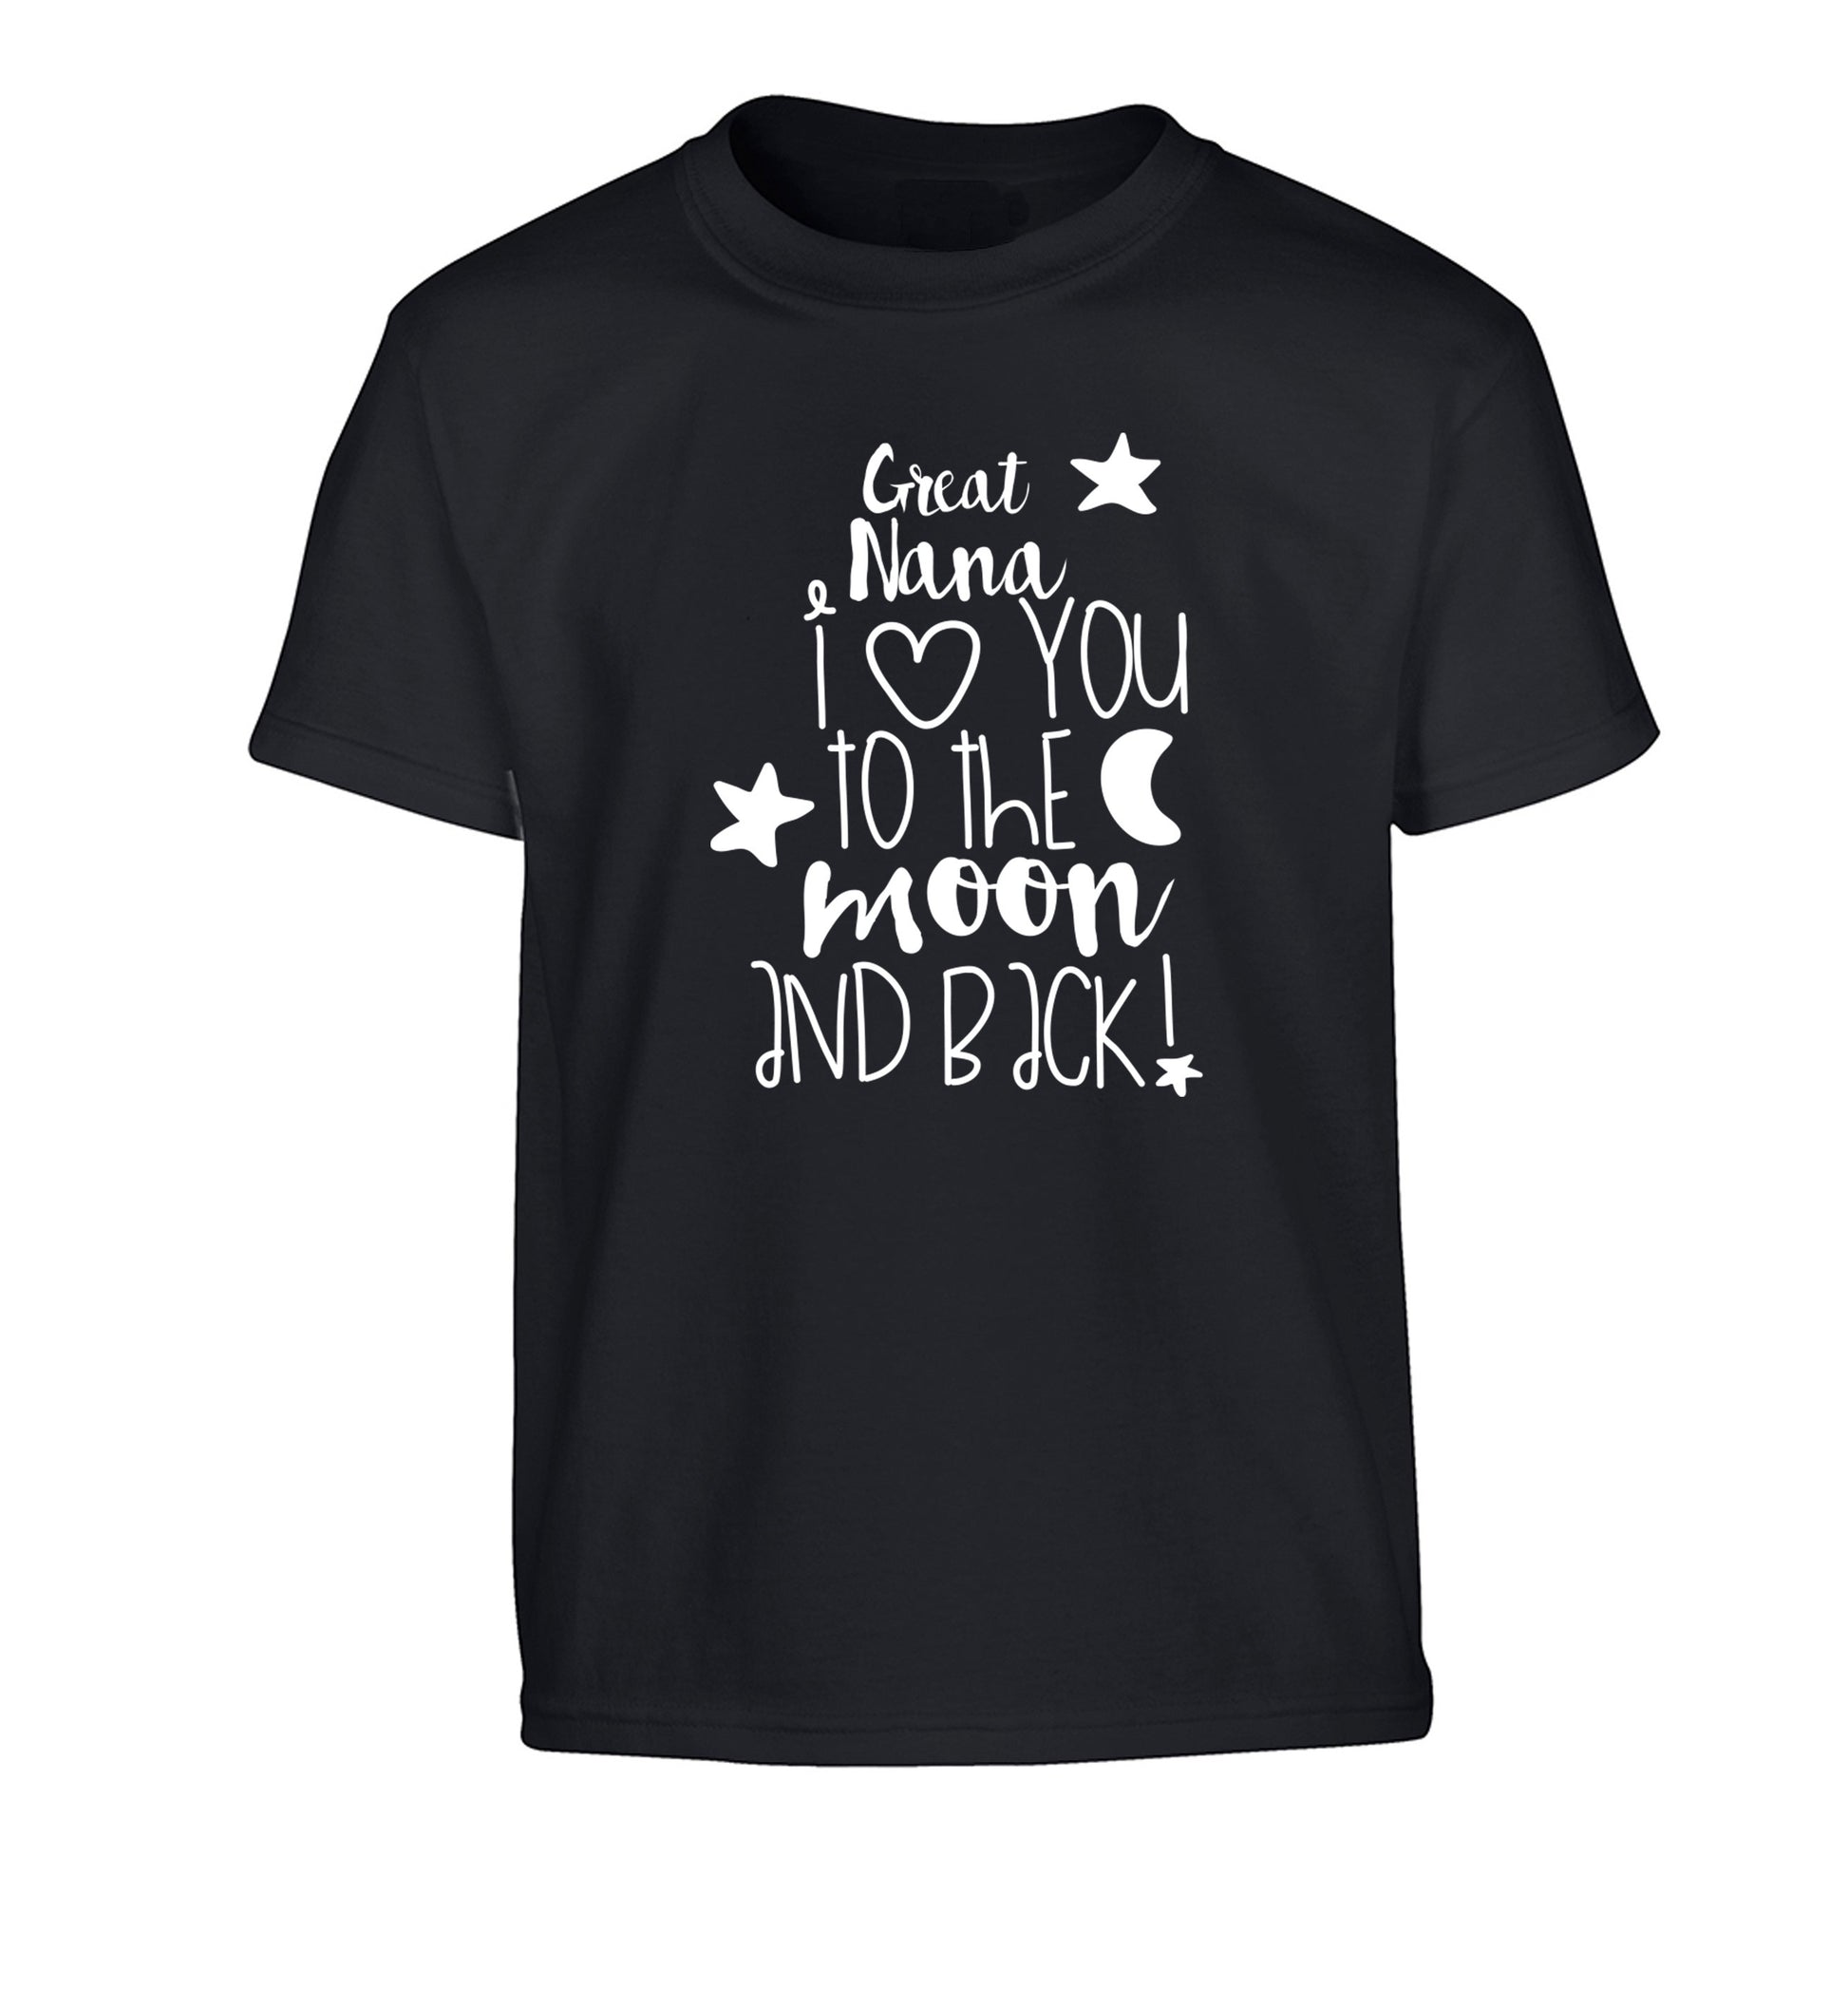 Great Nana I love you to the moon and back Children's black Tshirt 12-14 Years